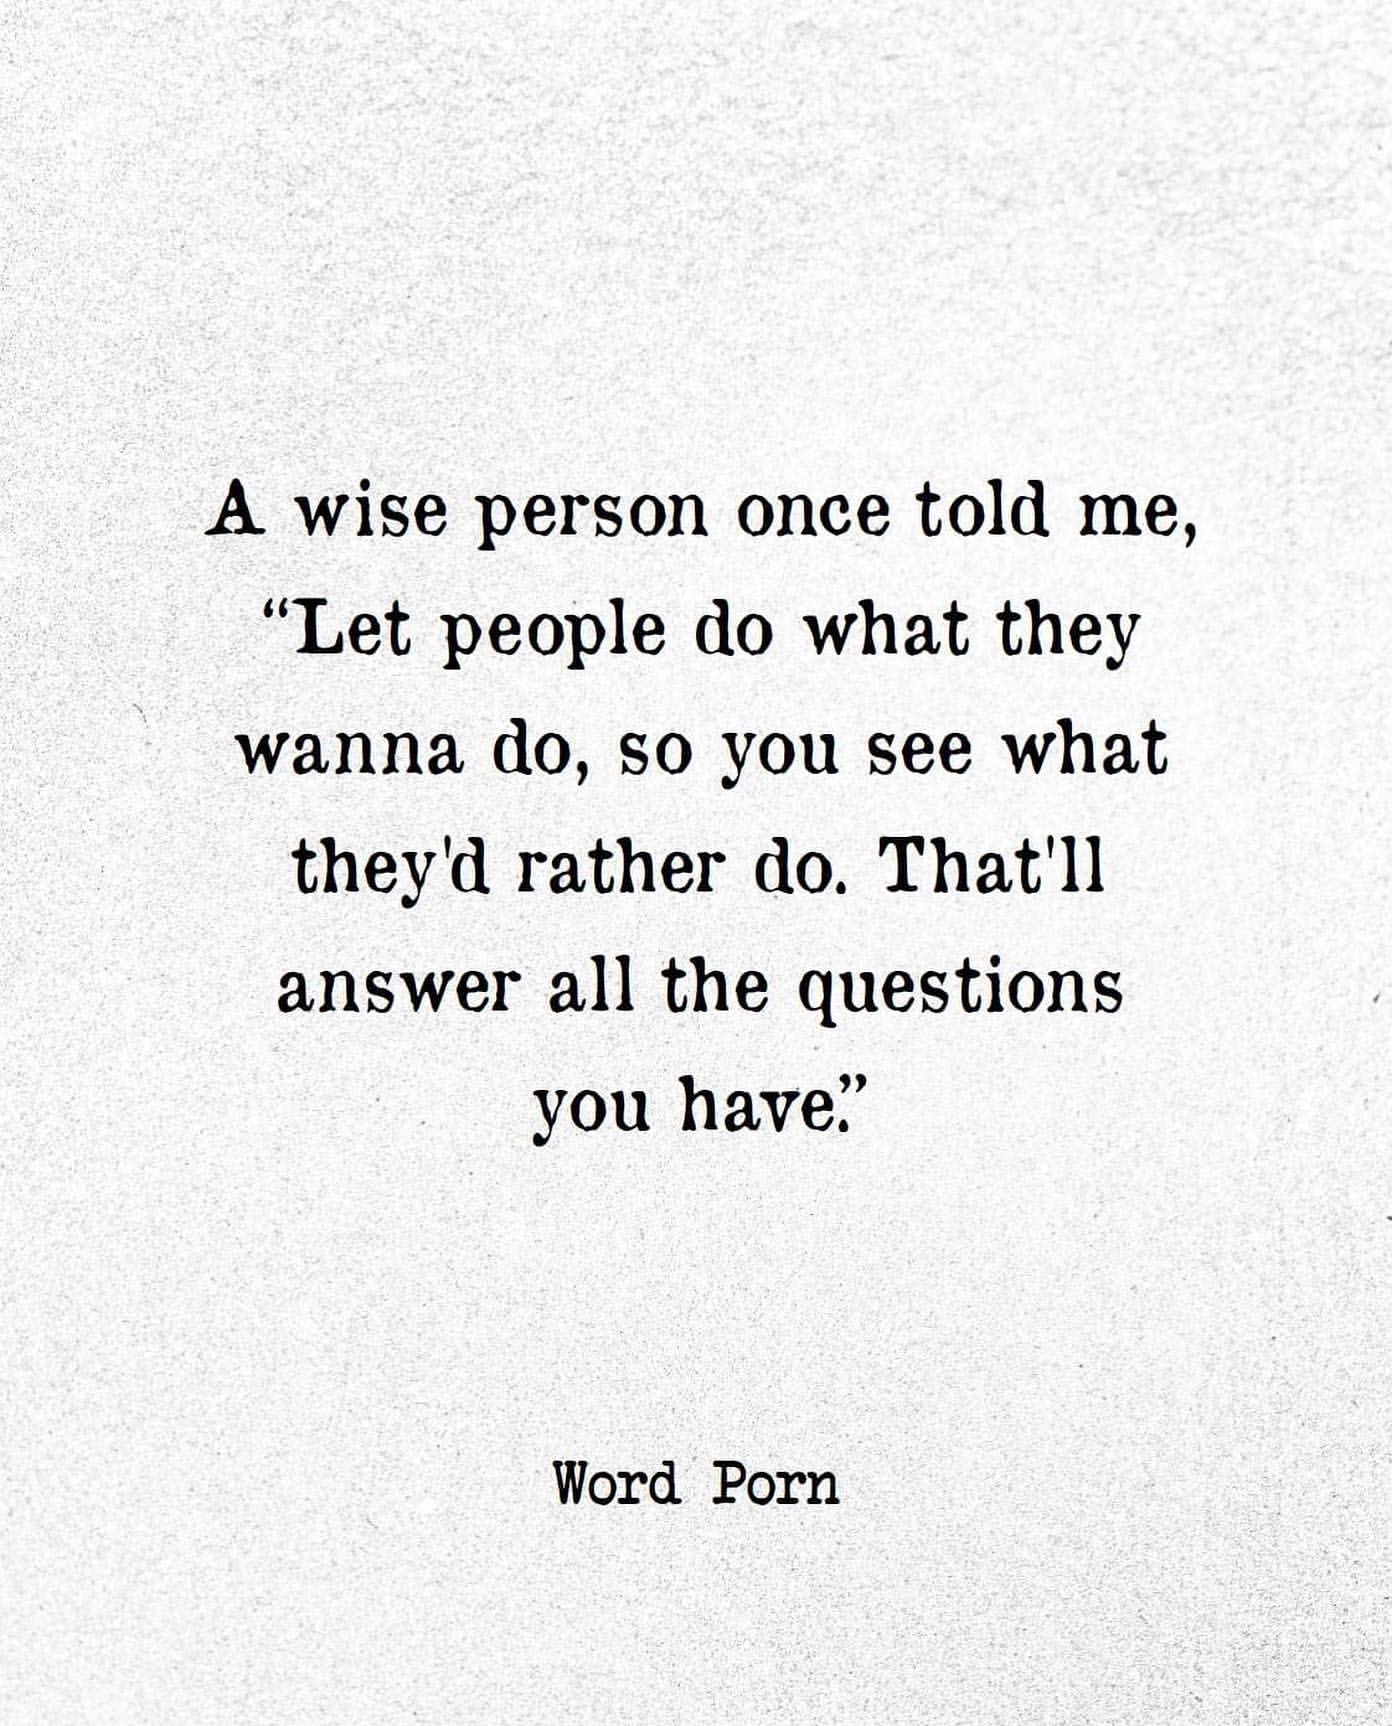 A wise person once told me, "Let people do what they wanna do, so you see what they'd rather do. That'll answer all the questions you have."